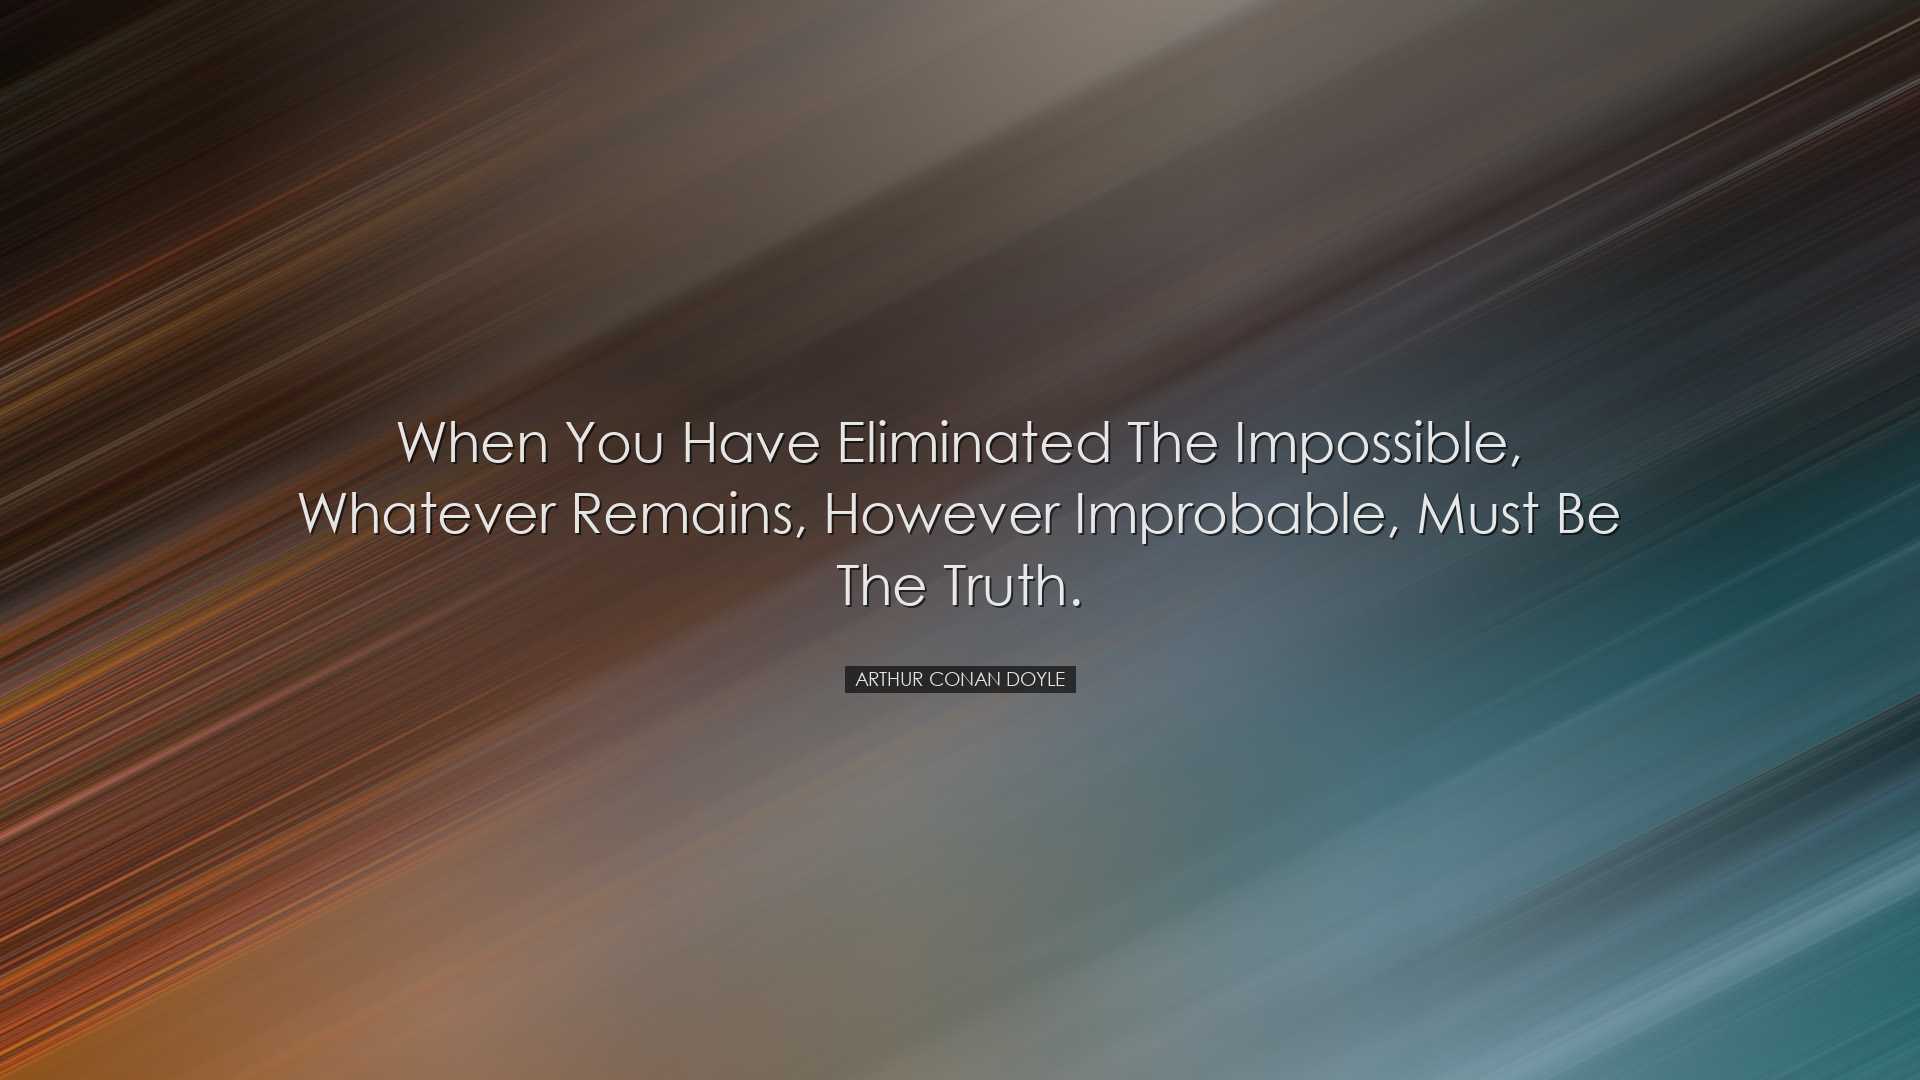 When you have eliminated the impossible, whatever remains, however